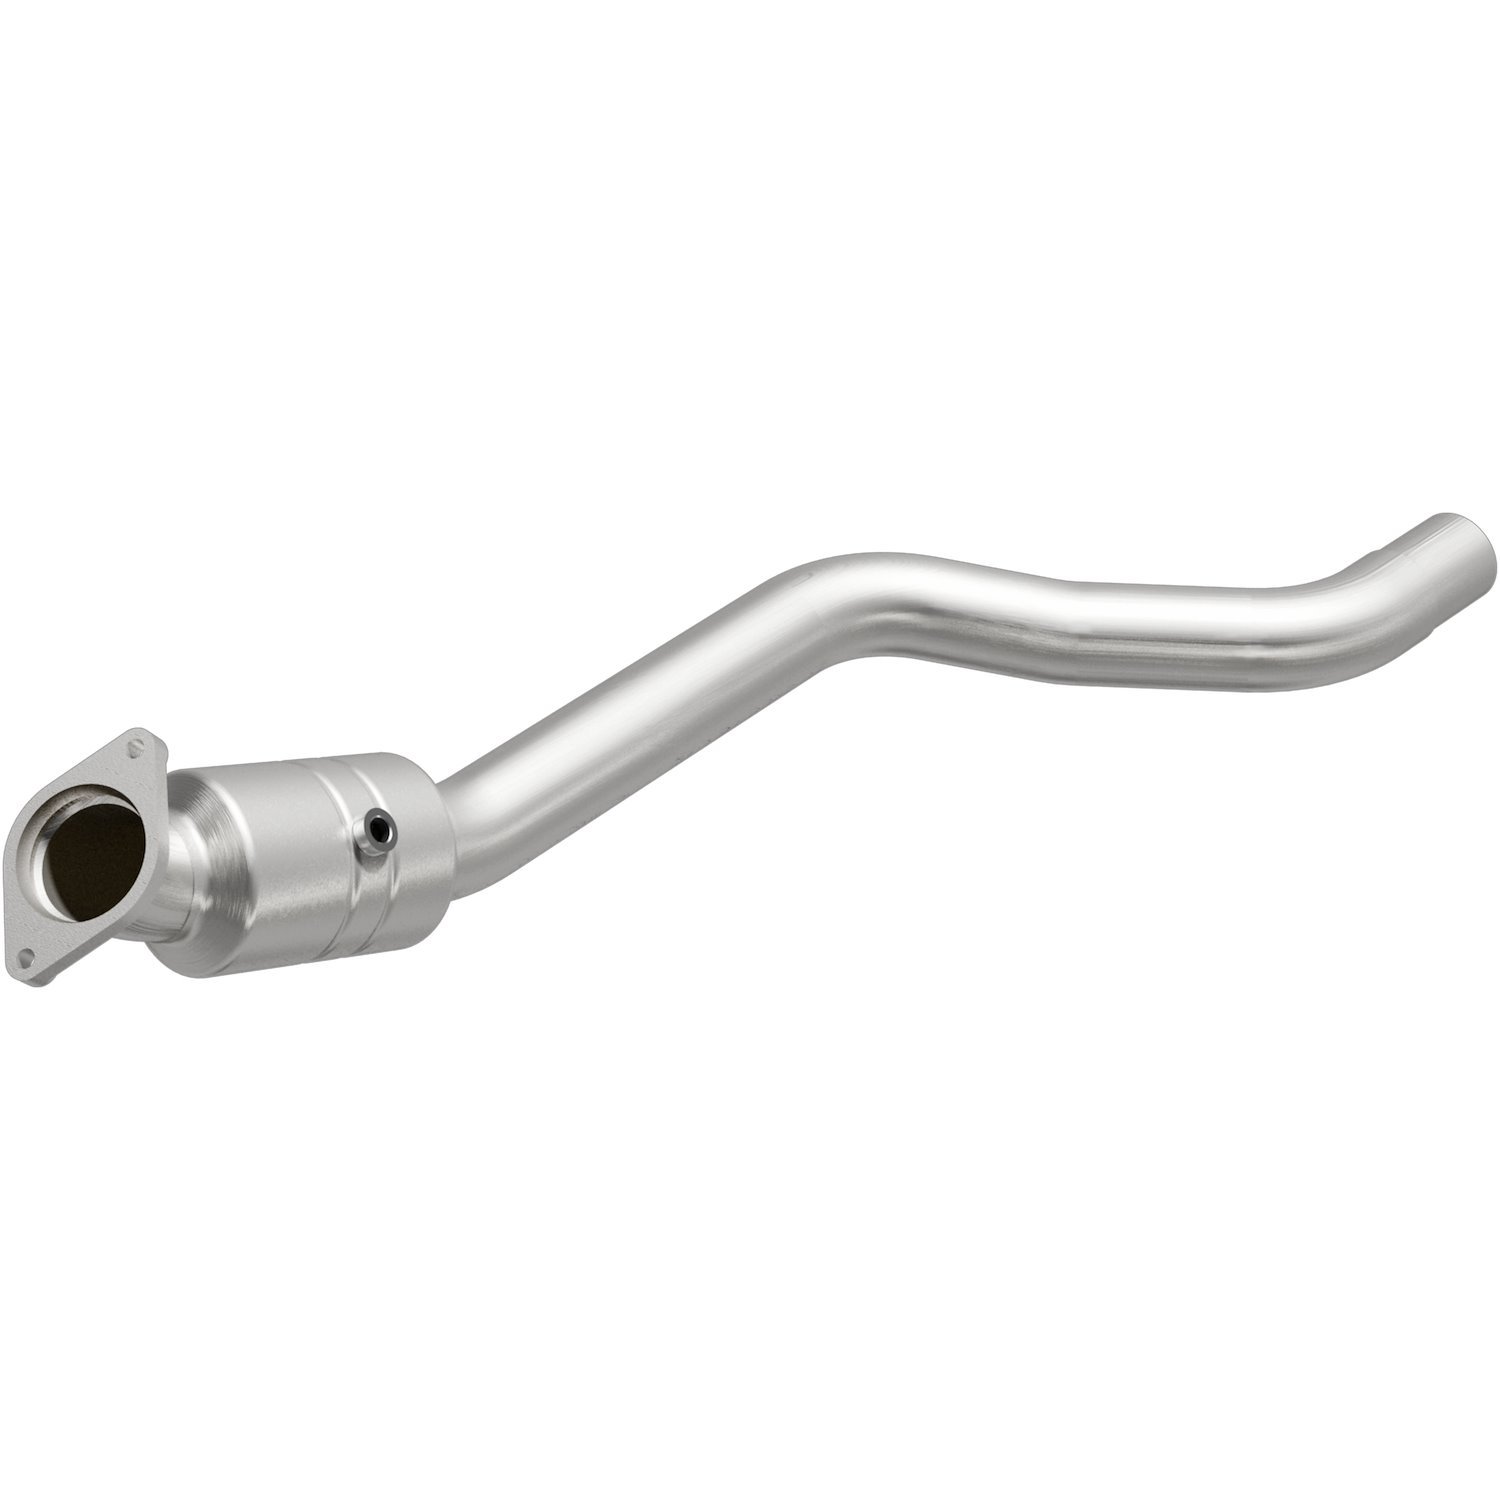 OEM Grade Federal / EPA Compliant Direct-Fit Catalytic Converter 52479